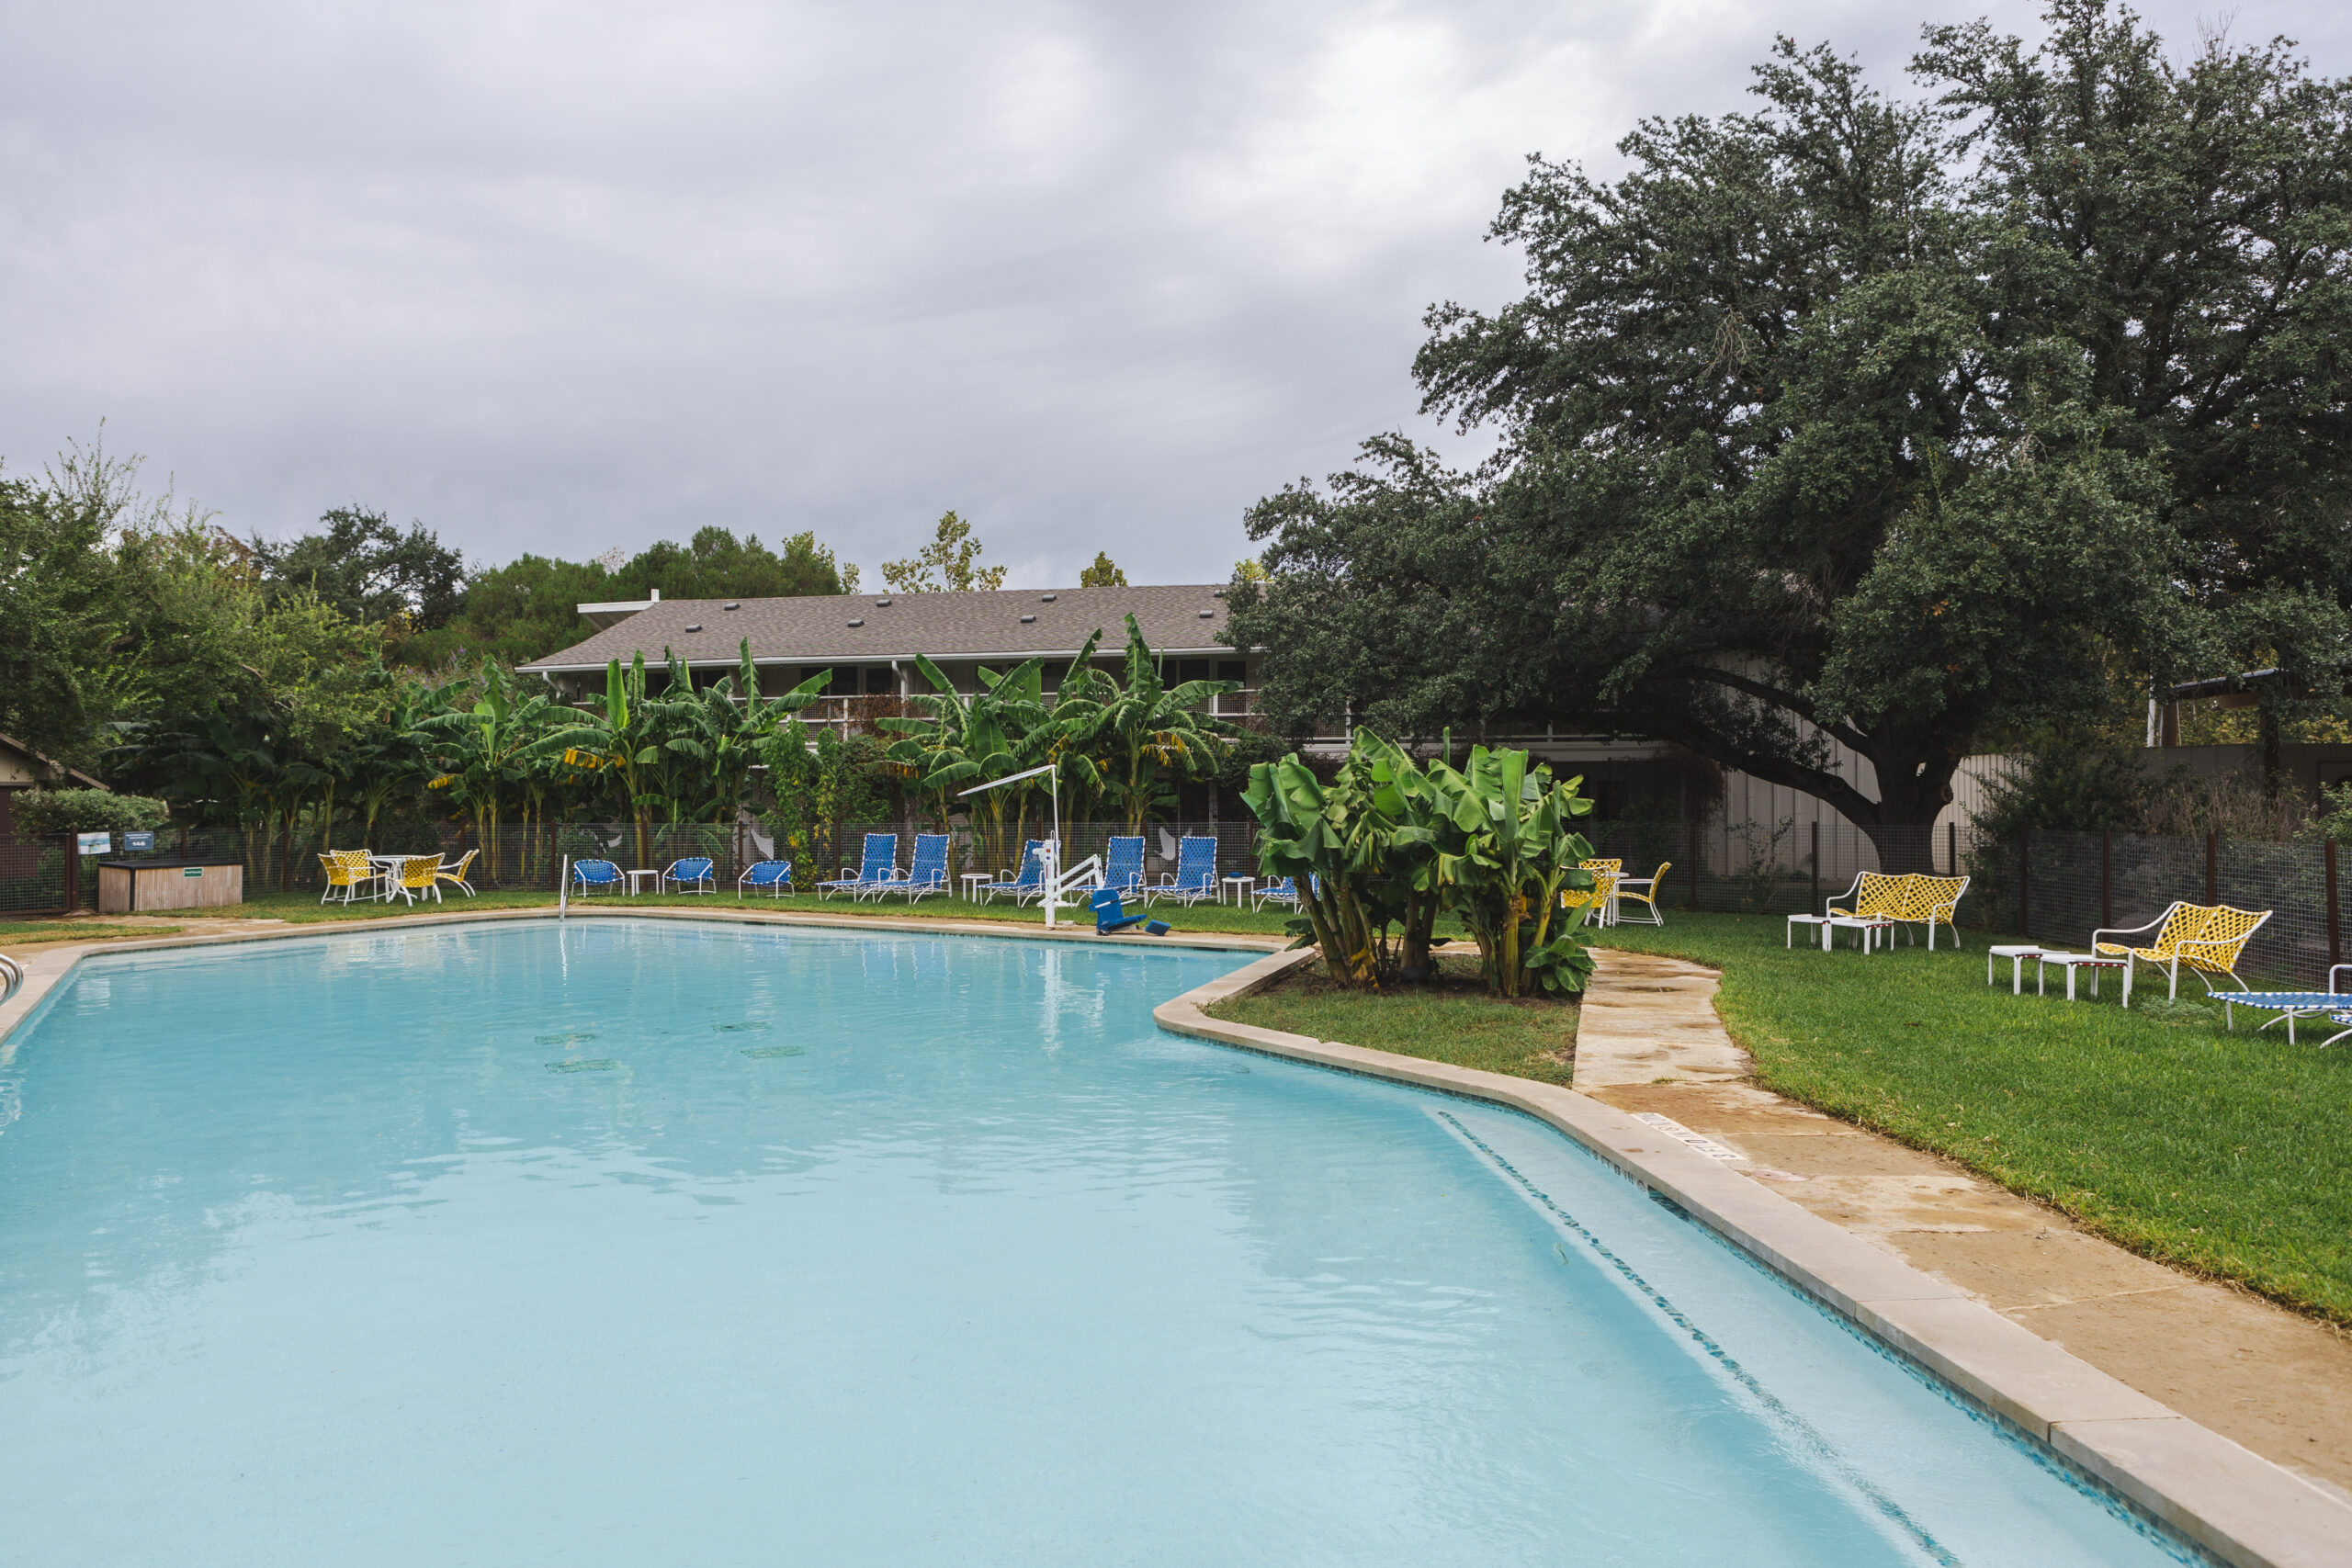 Inviting pool area with lounge chairs and tables at the Stagecoach Inn in Salado, Texas.